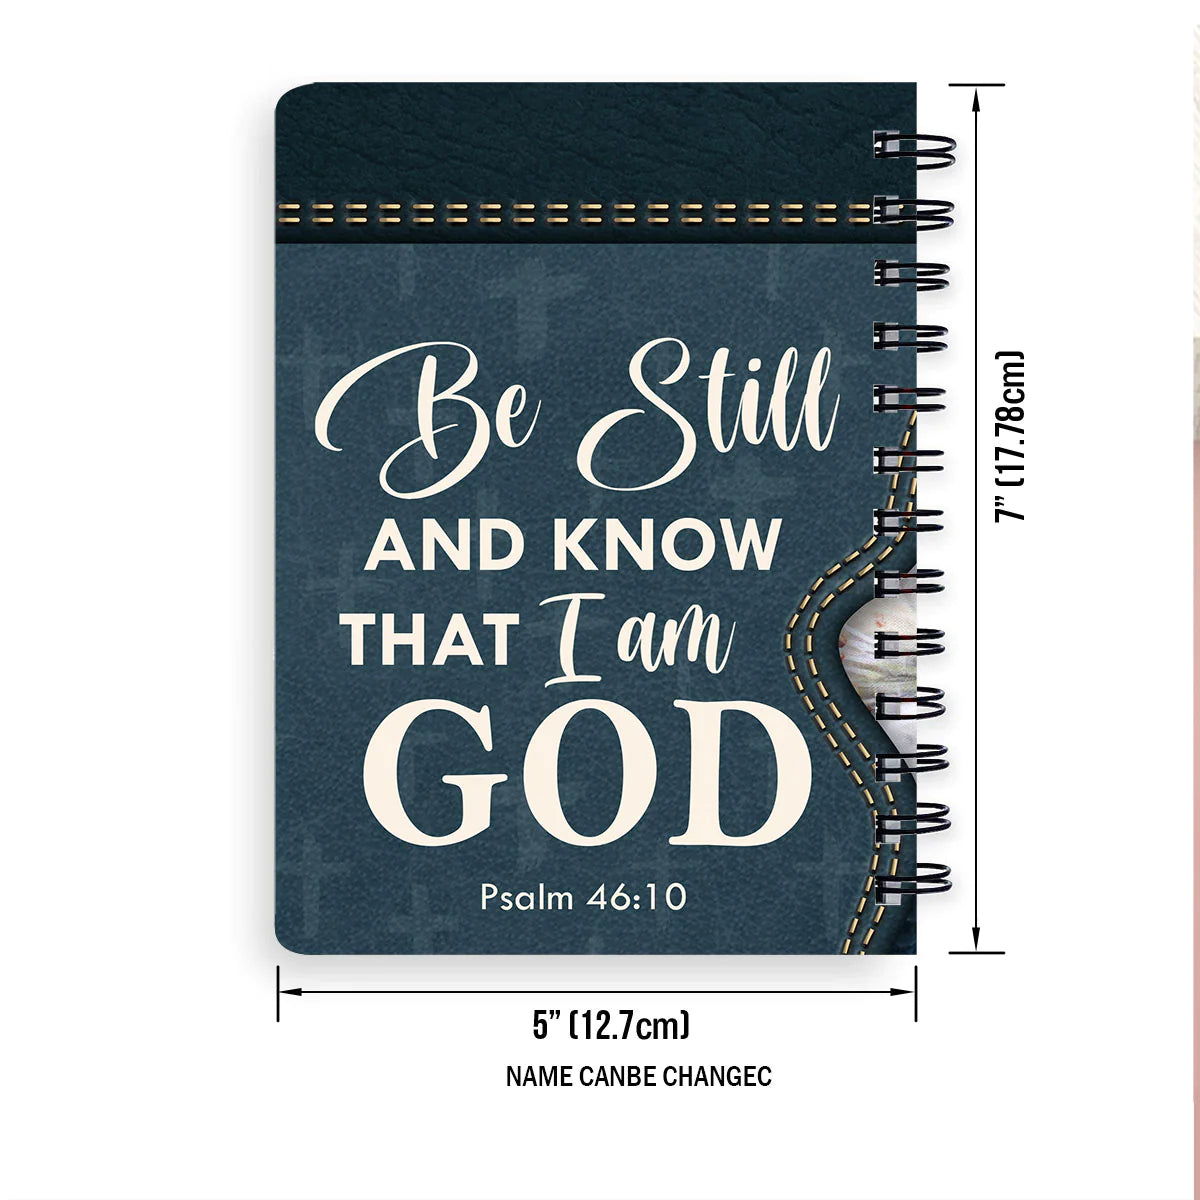 Christianart Spiral Journal, Be Still And Know That I Am GOD Psalm 46:10, Personalized Spiral Journal, Jesus Spiral Journal. - Christian Art Bag